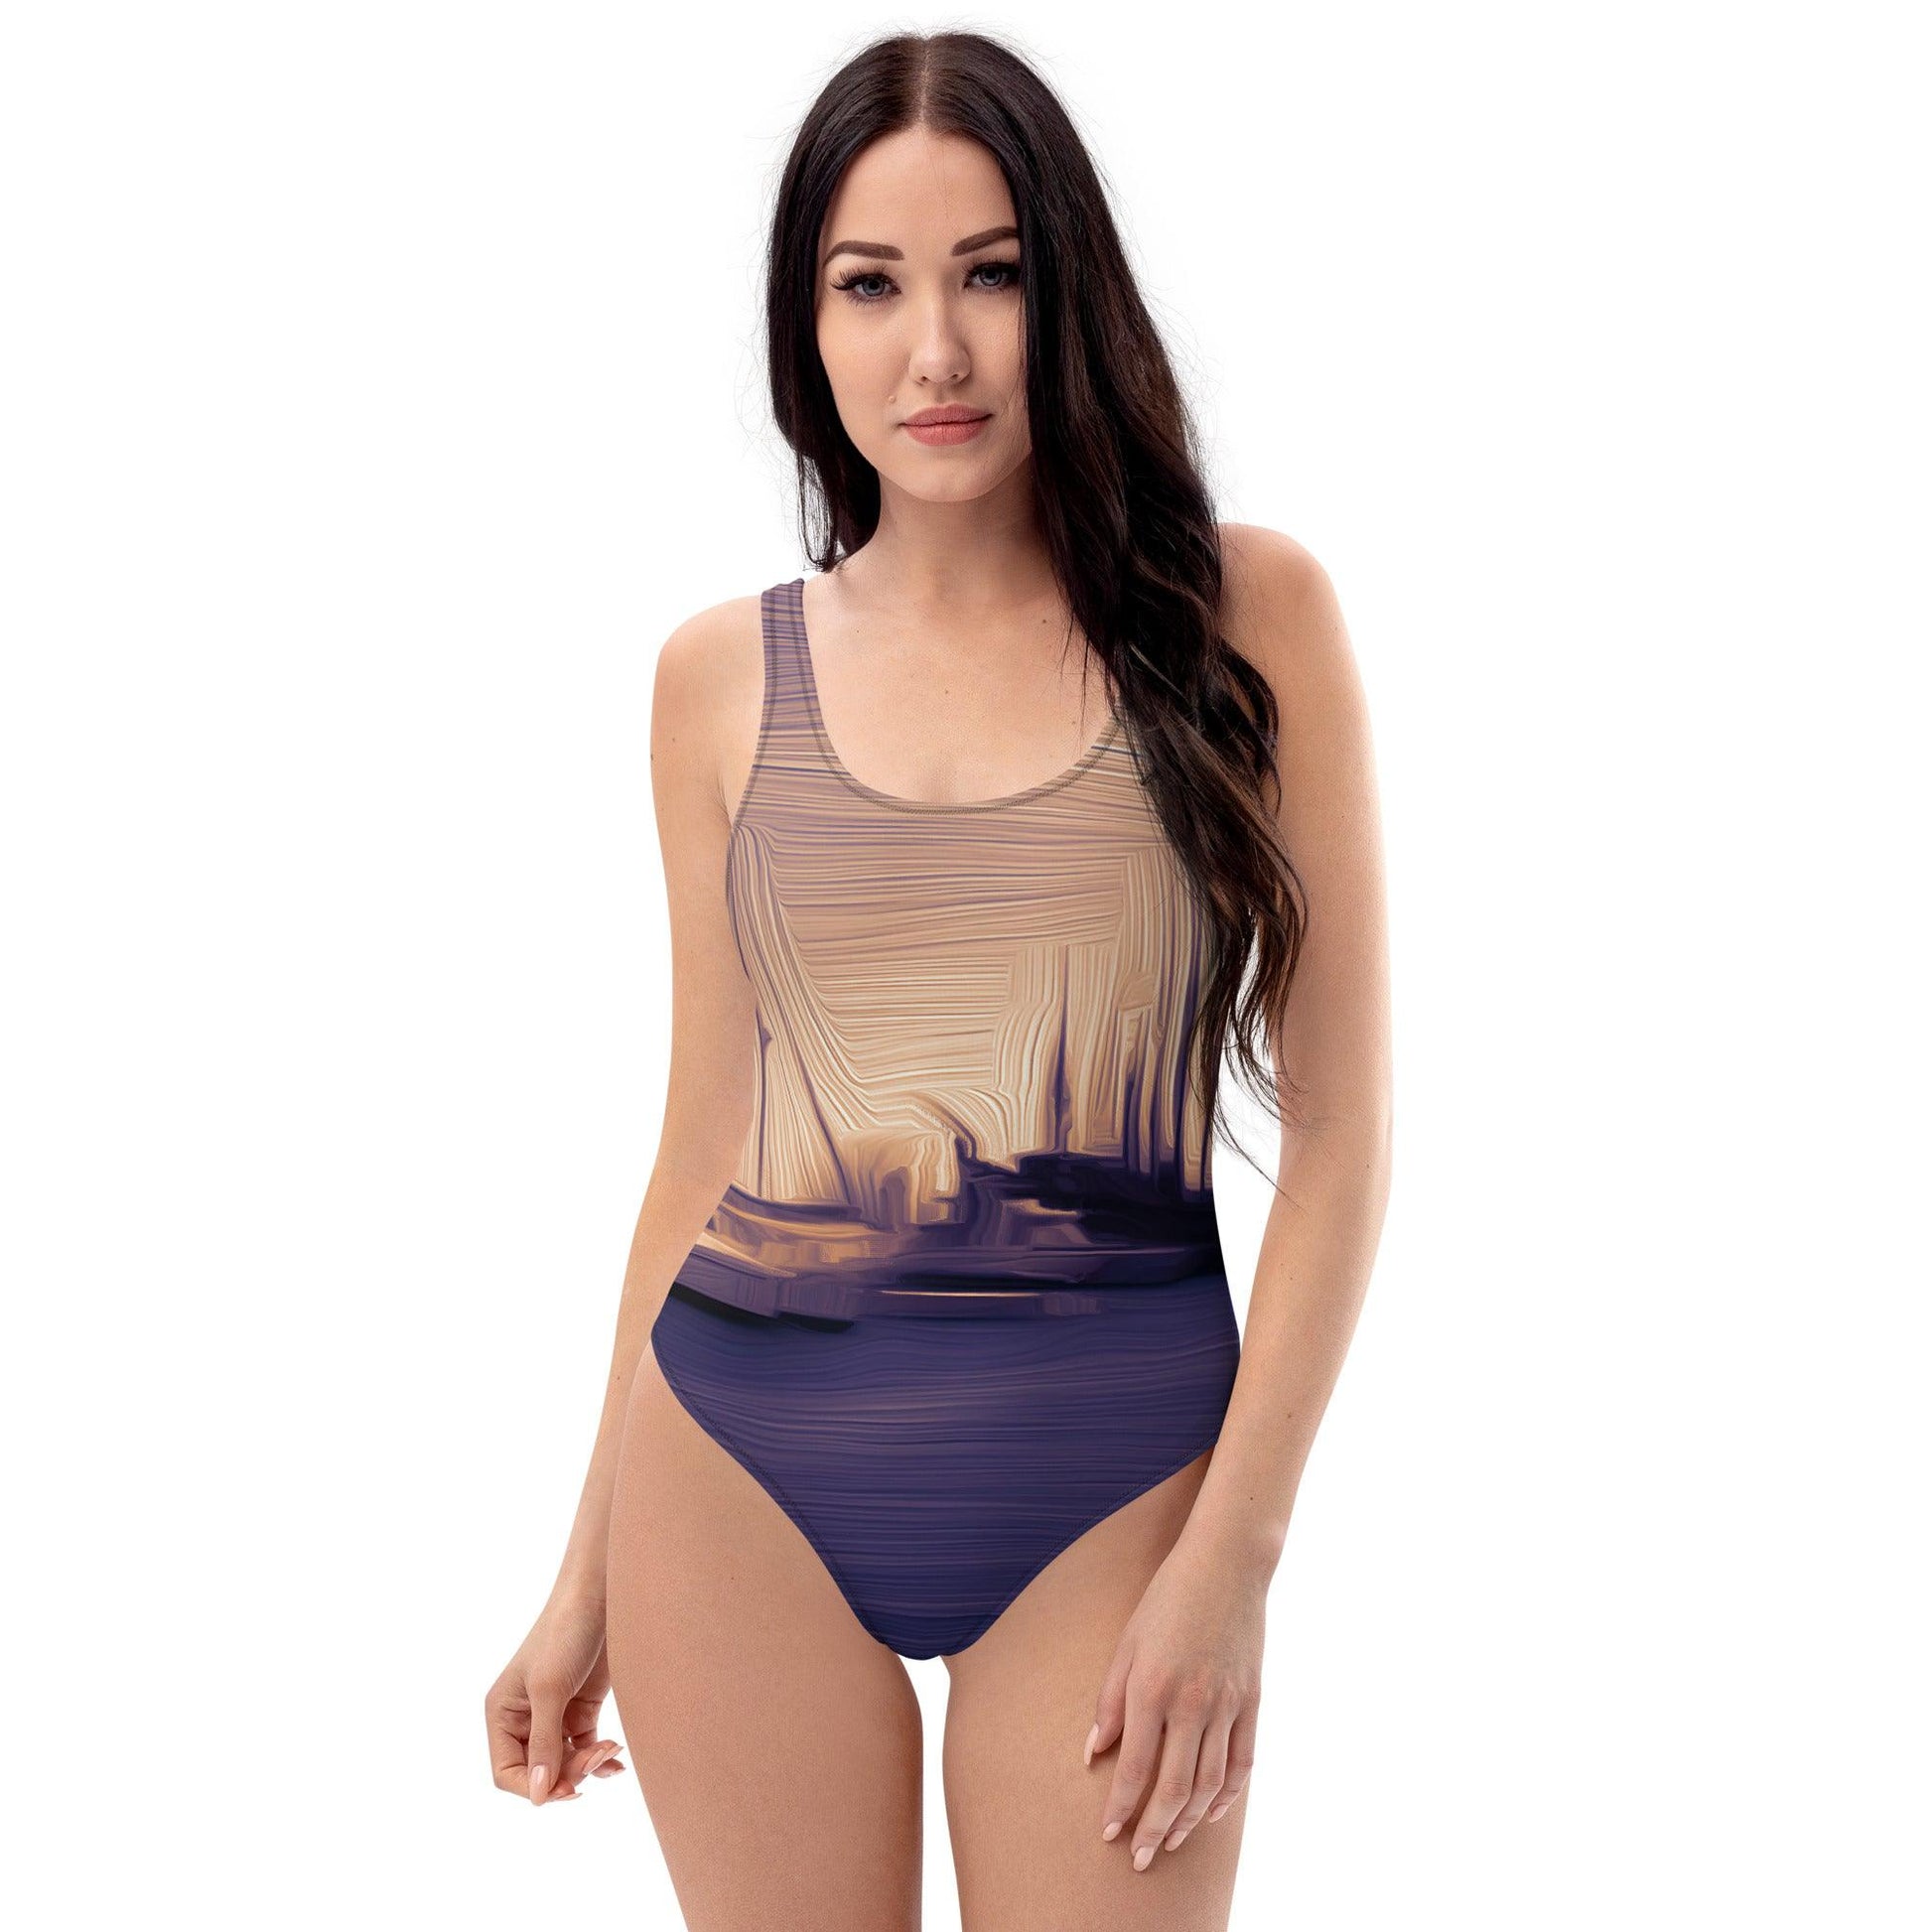 The Sleeping Yachts (at Sunset) - Womens One-Piece Swimsuit - iSAW Company